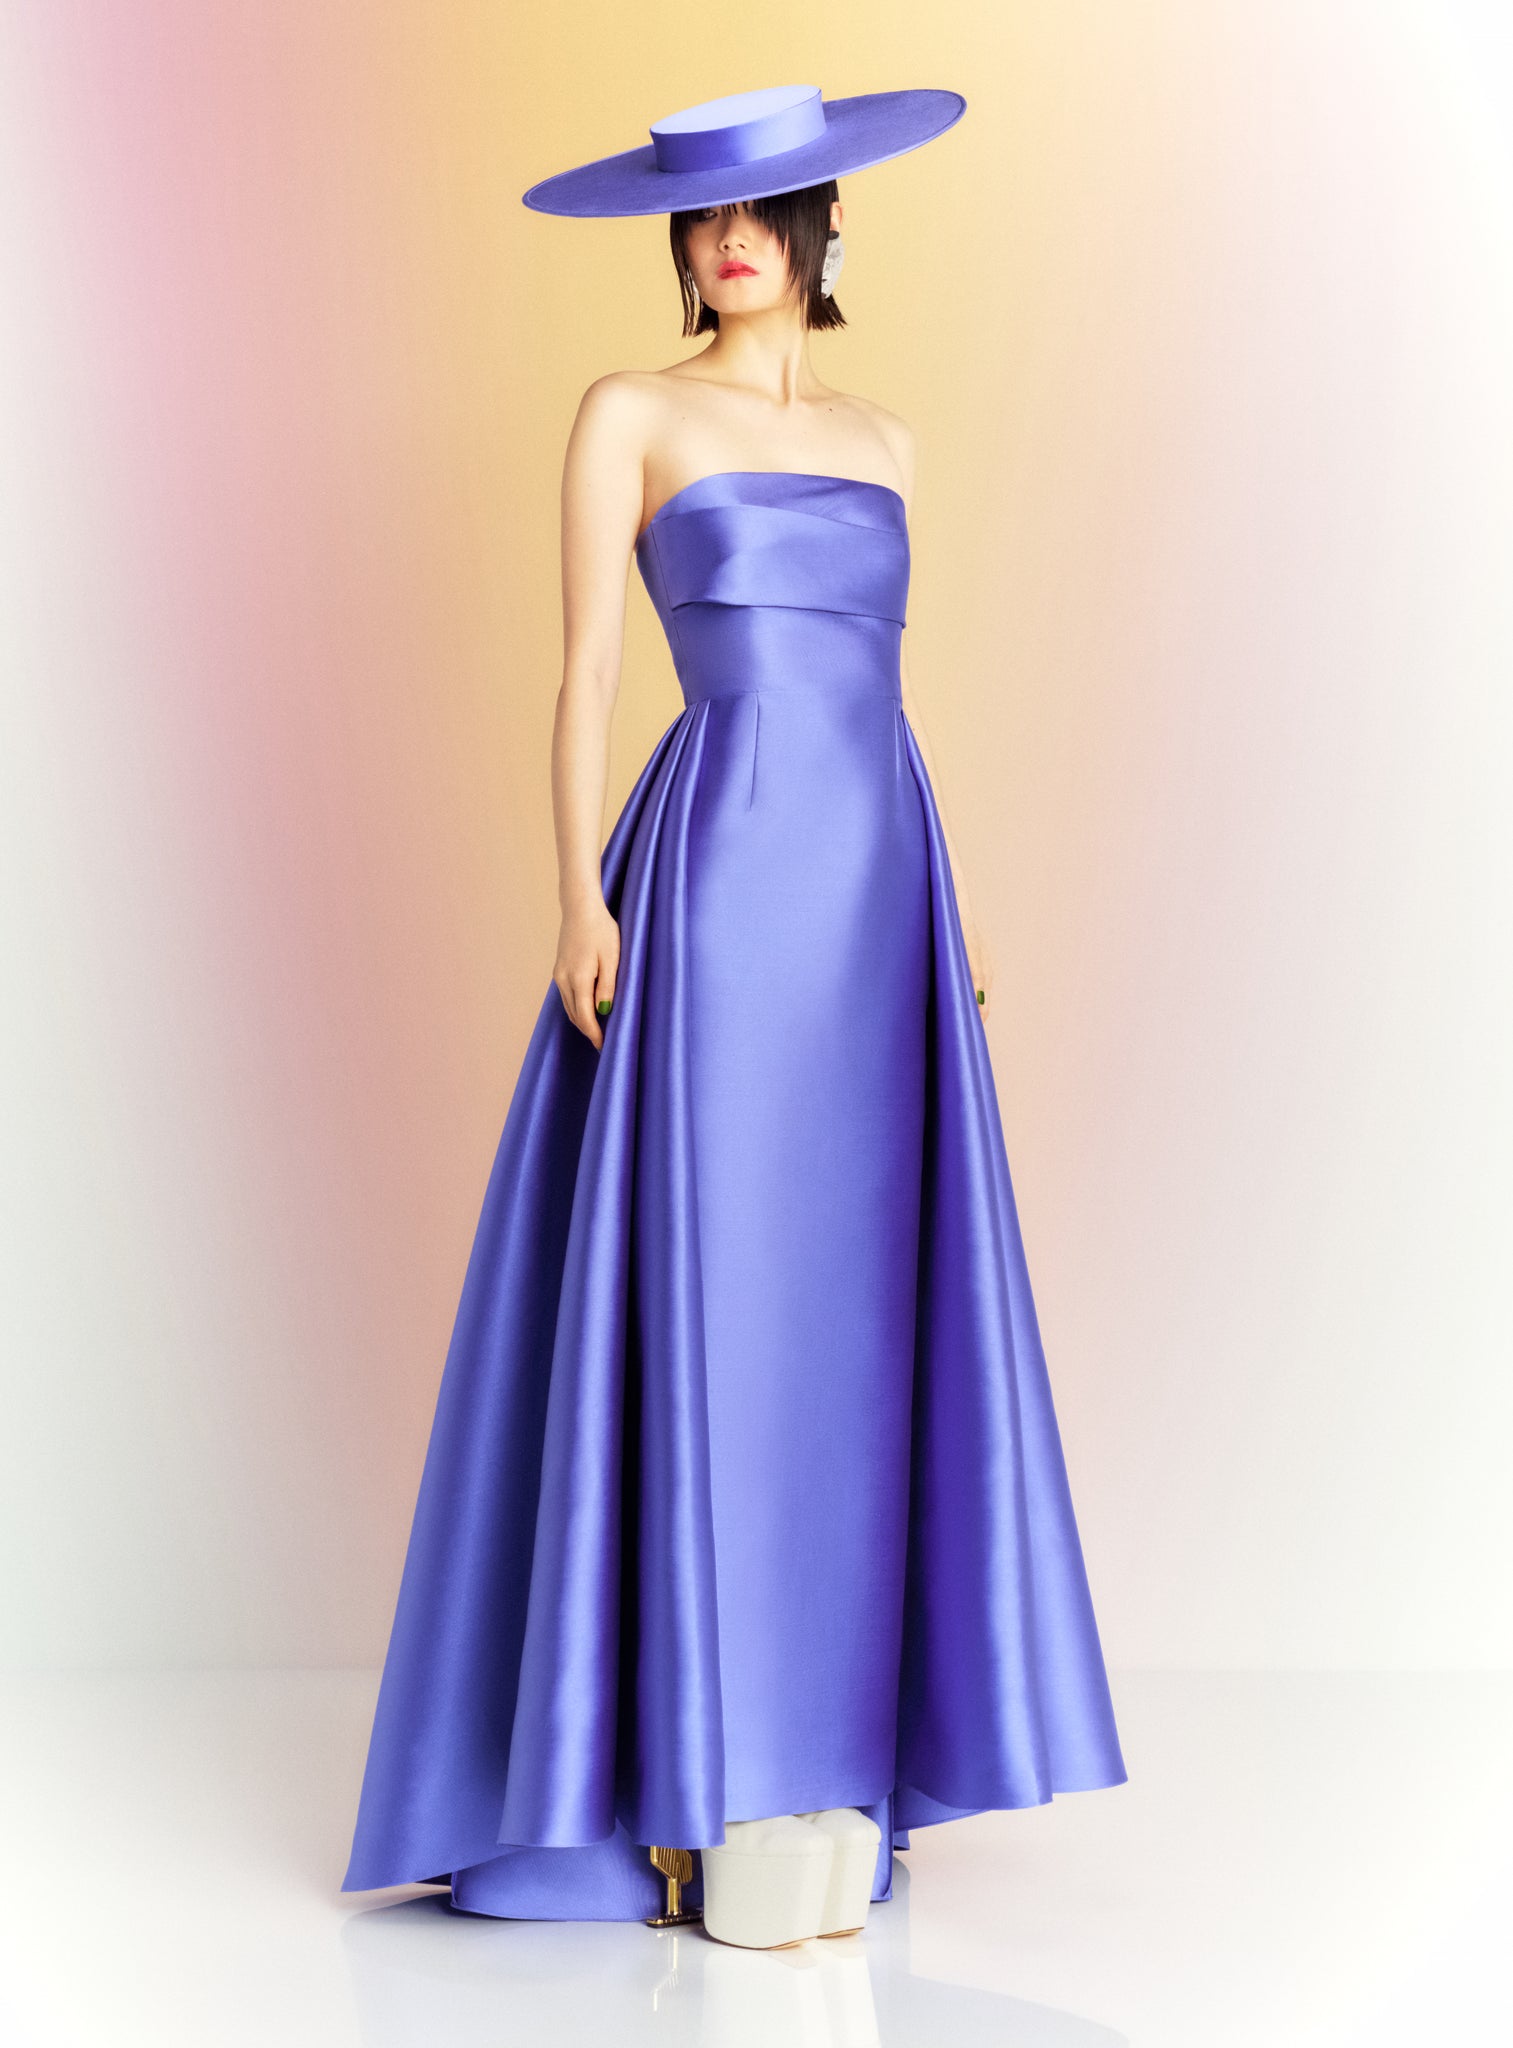 The Tiffany Maxi Dress in Periwinkle